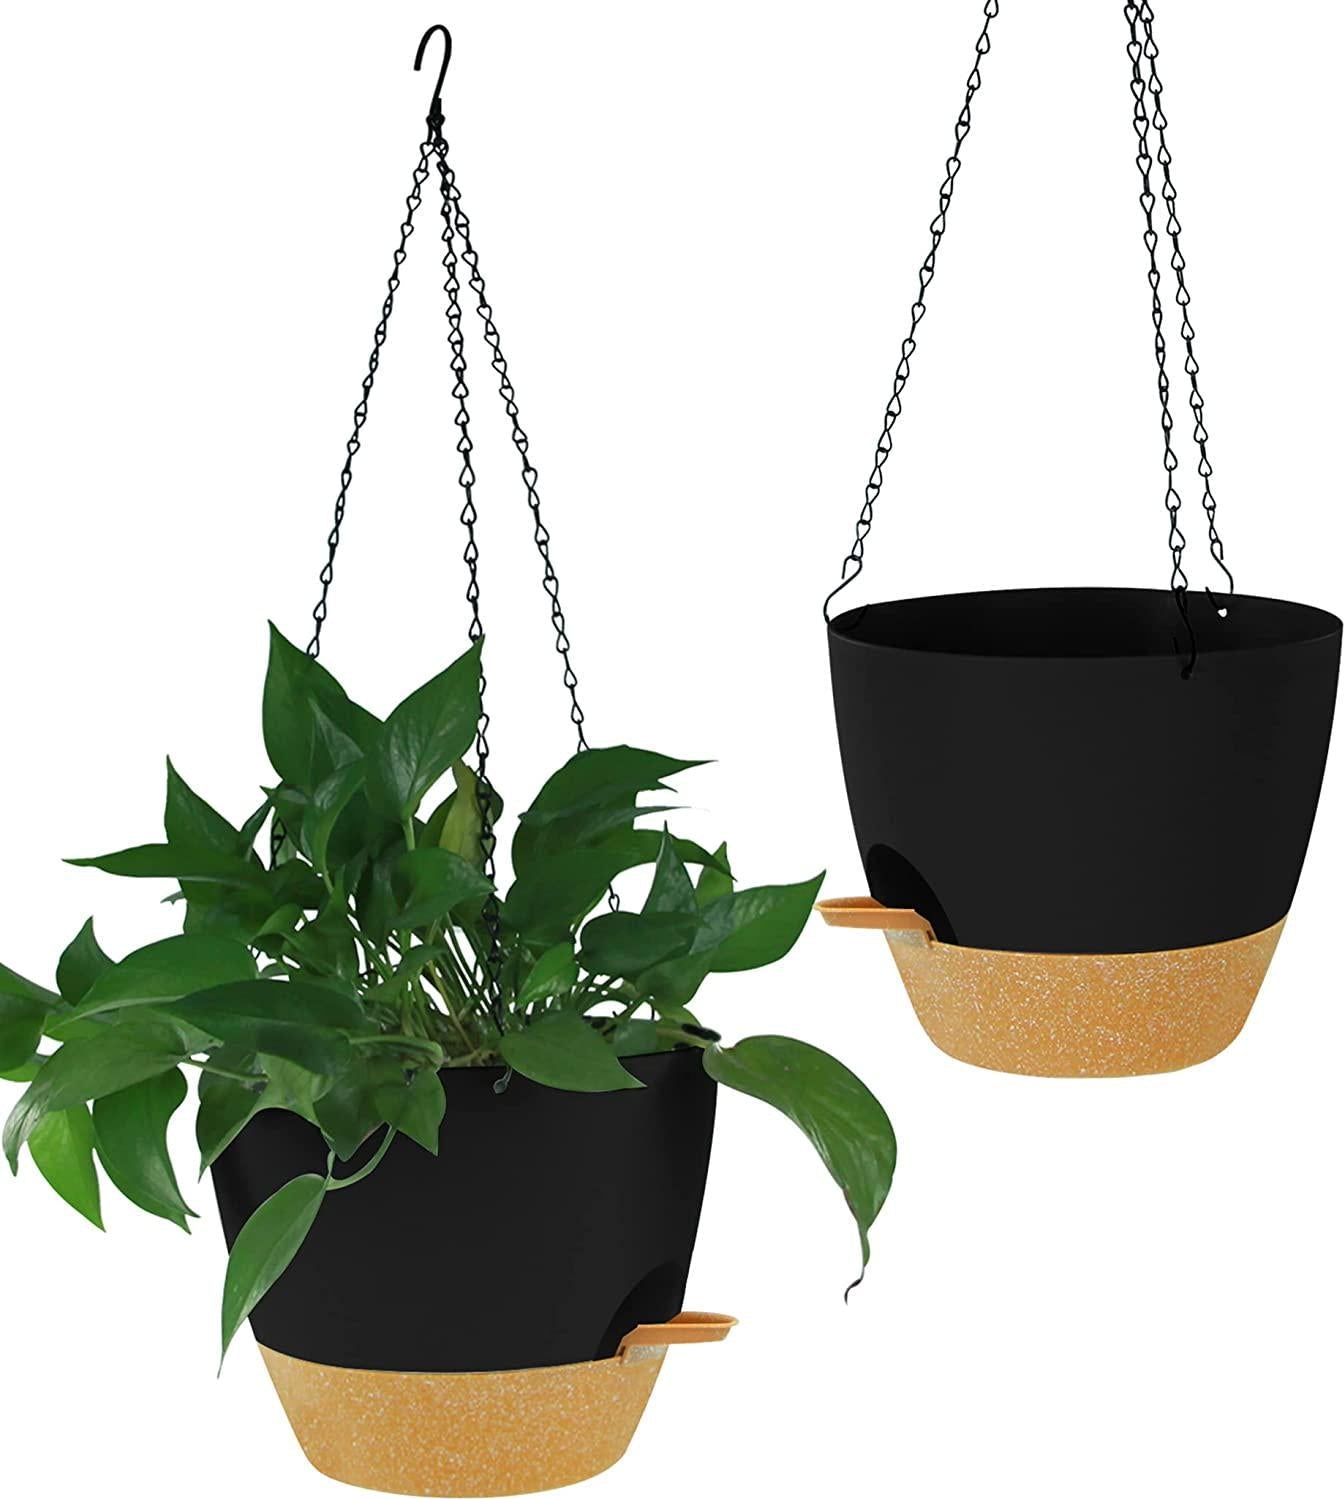 mossFlos 10 Inch Hanging Planters, 2pcs Self Watering Hanging Pots with Drainage Holes, 40oZ Deep Reservior for Indoor Outdoor Hanging Plastic, Hanging Flower Pots for Garden Home (Black)-